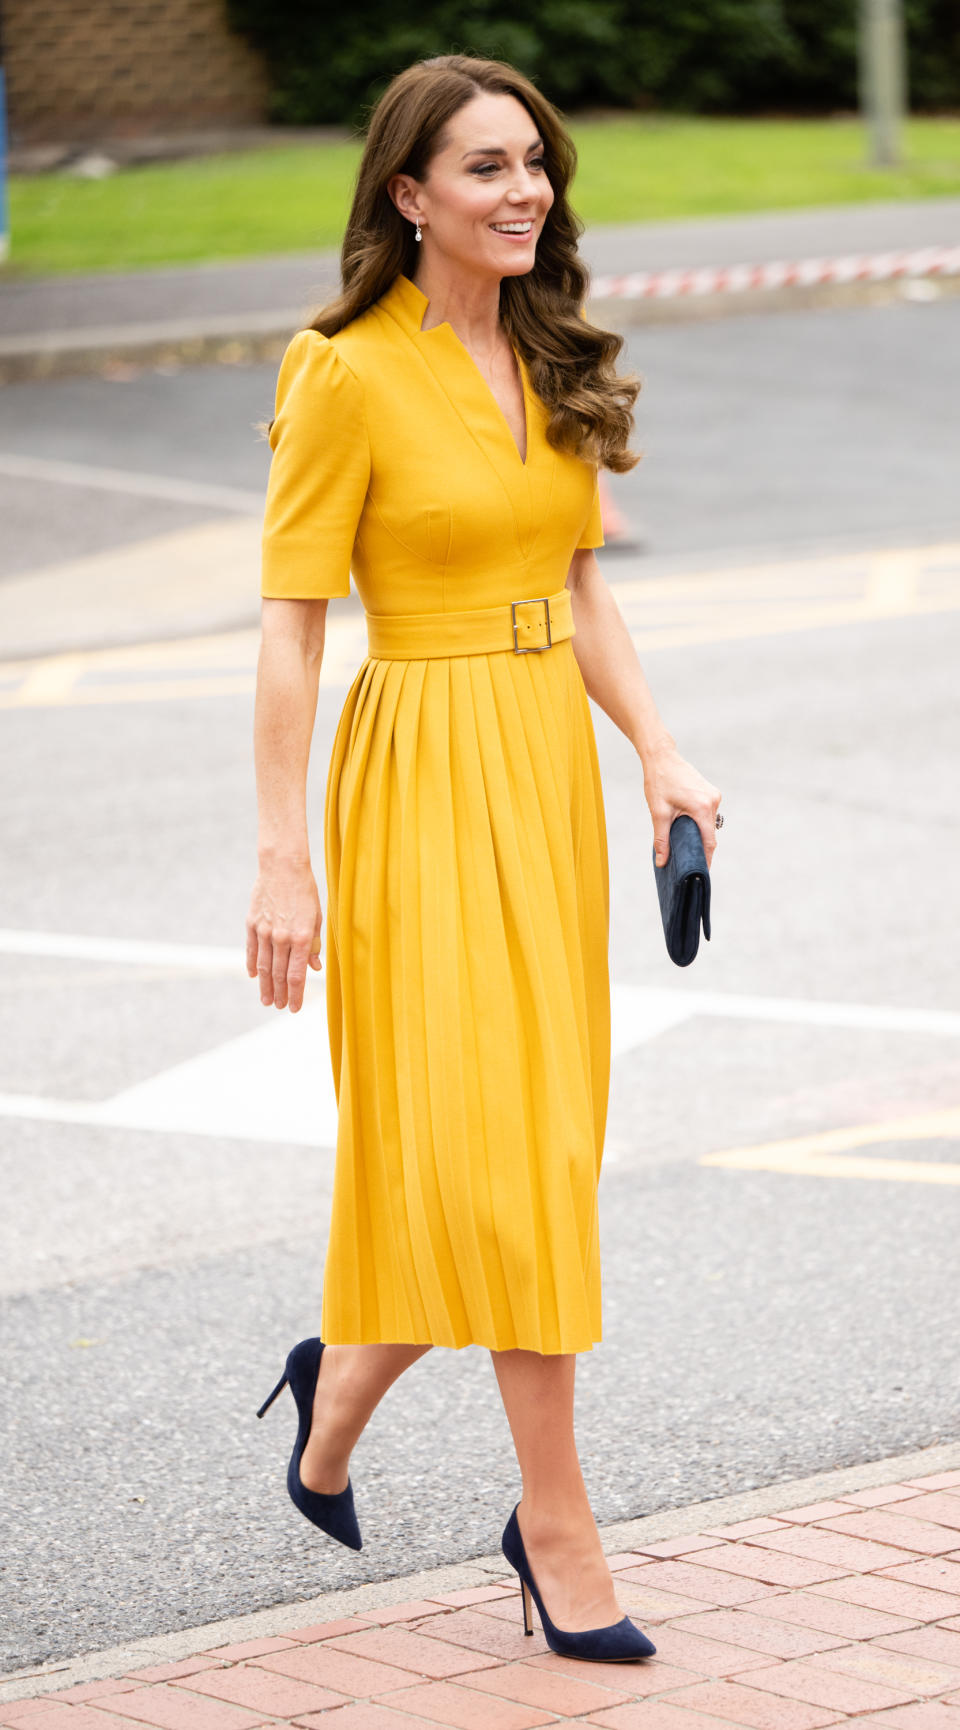 kate middleton wearing yellow dress and black heels, The Princess of Wales visits the Royal Surrey County Hospital's Maternity Unit on October 05, 2022 in Guildford, England. (Photo by Samir Hussein/WireImage)